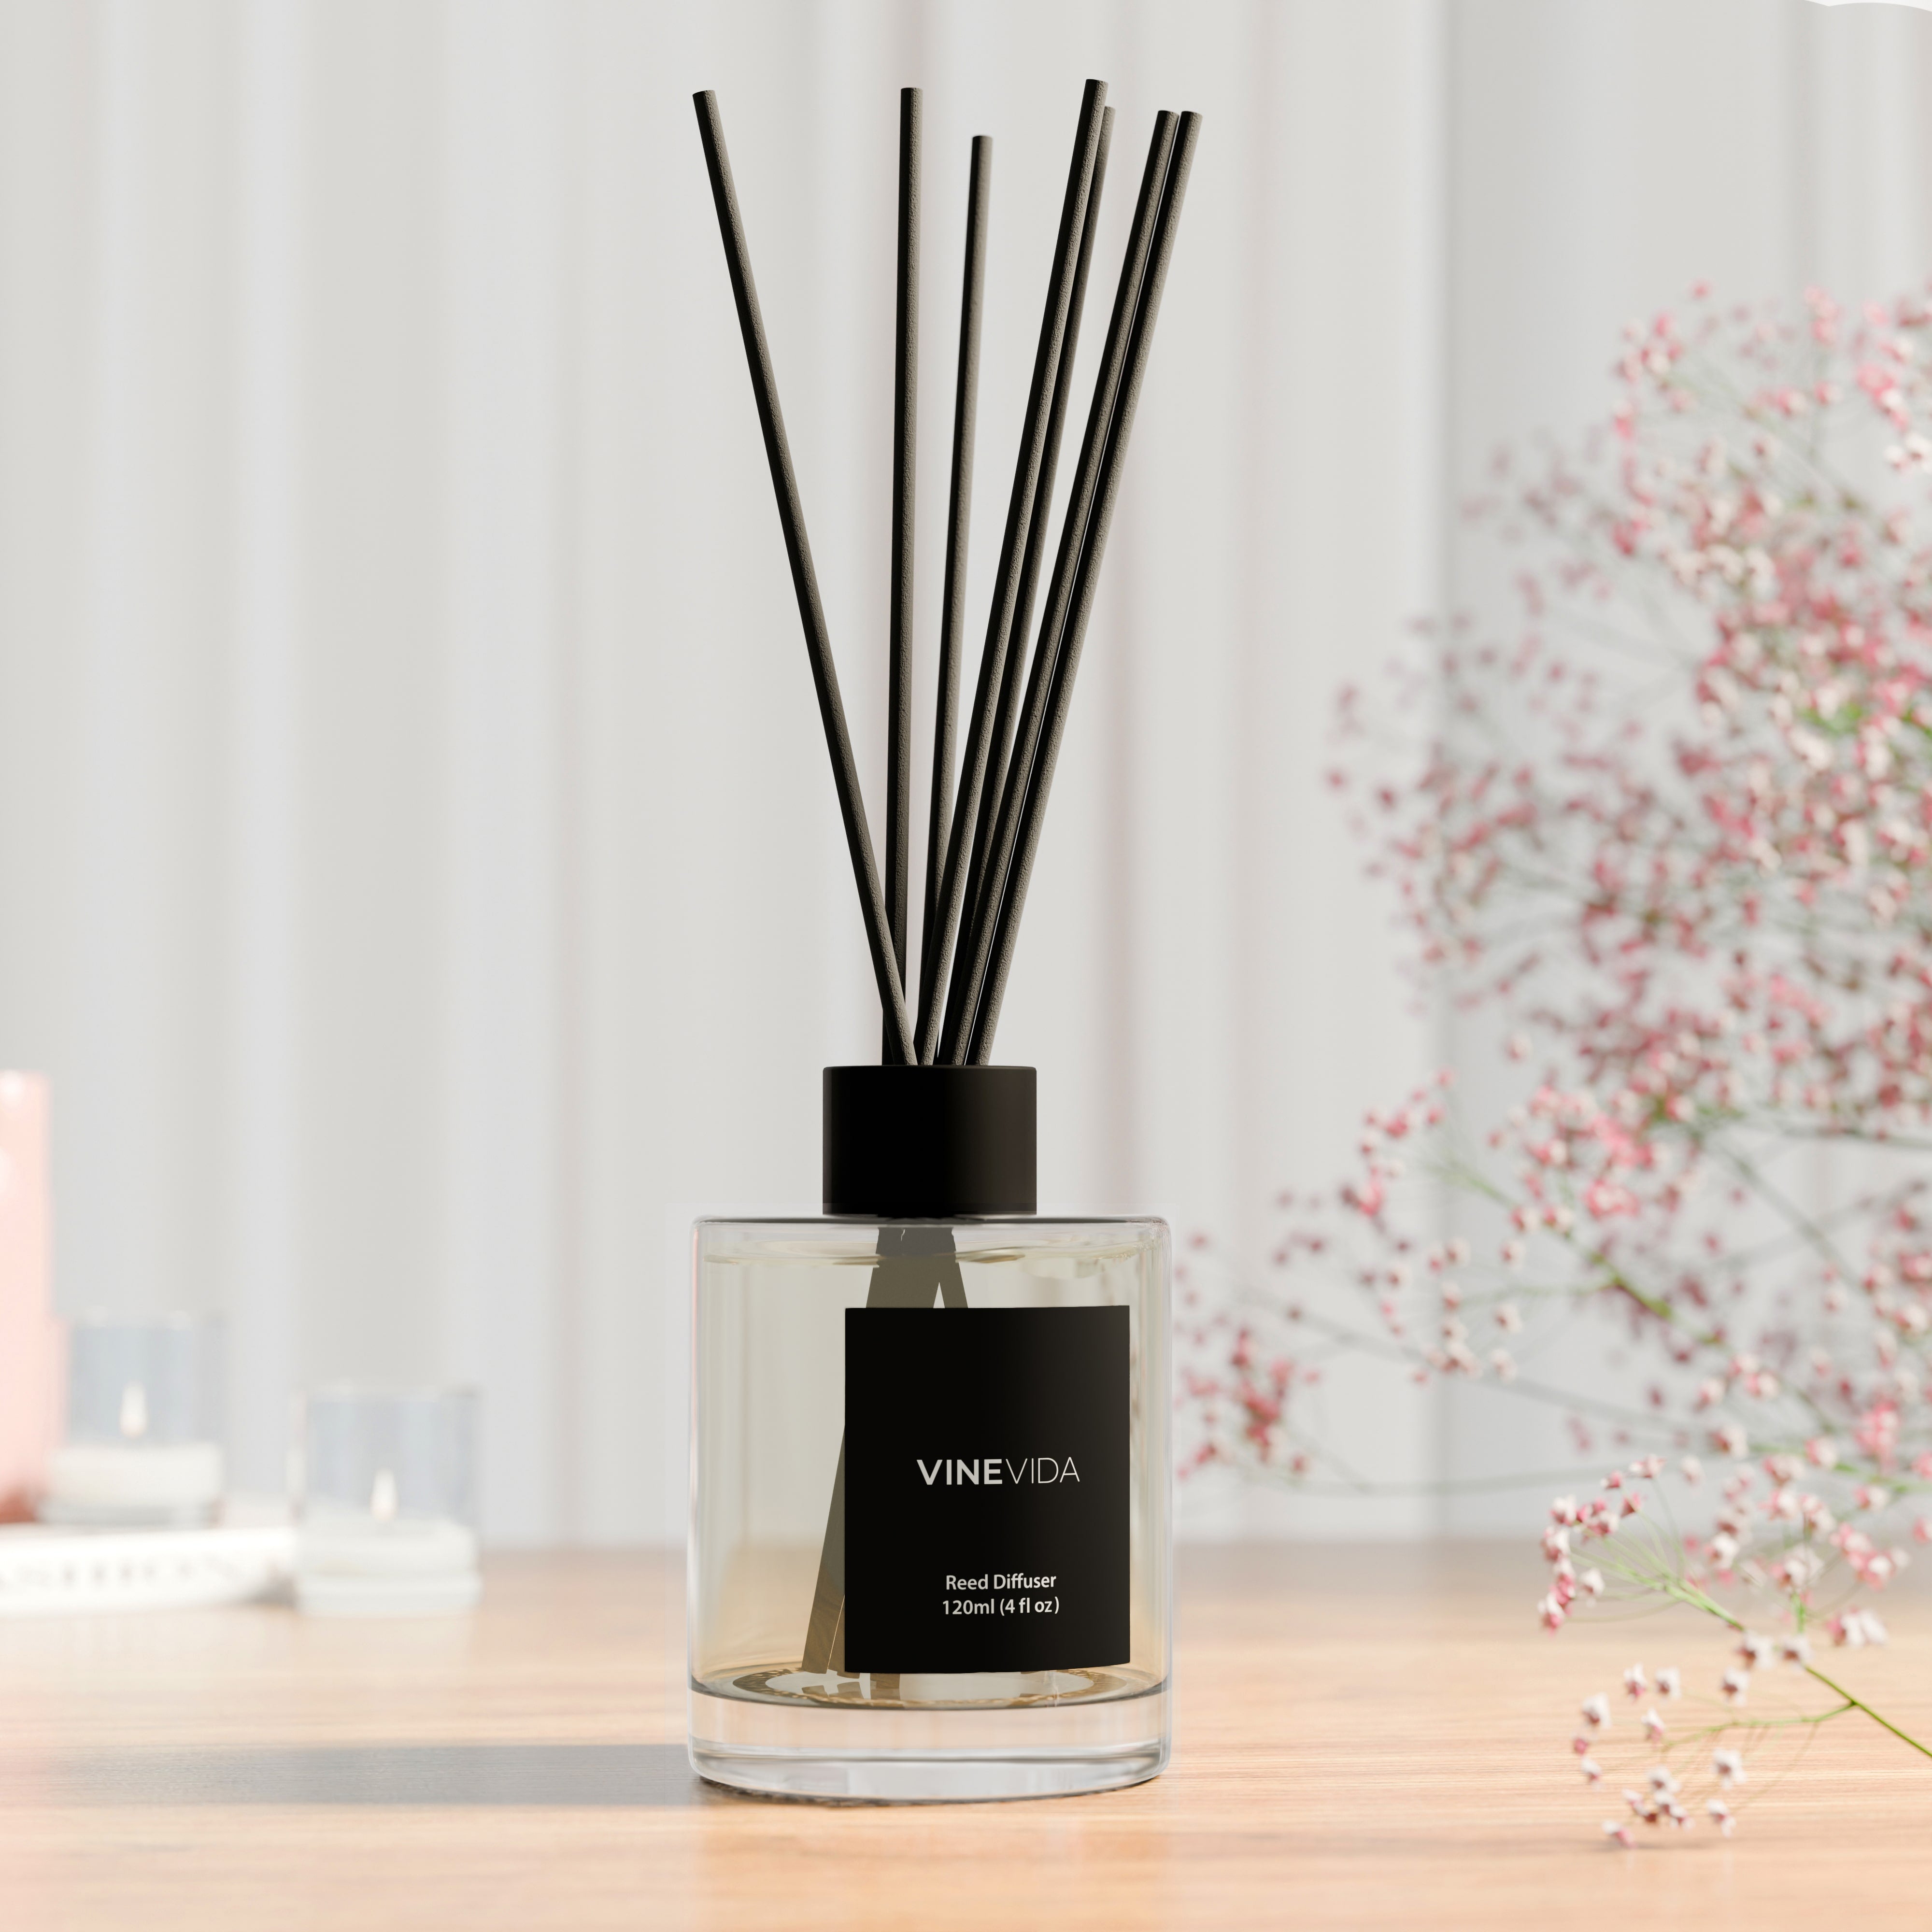 NO. 1104 Reed Diffuser - Inspired by: Buttercream Icing by Bath & Body Works